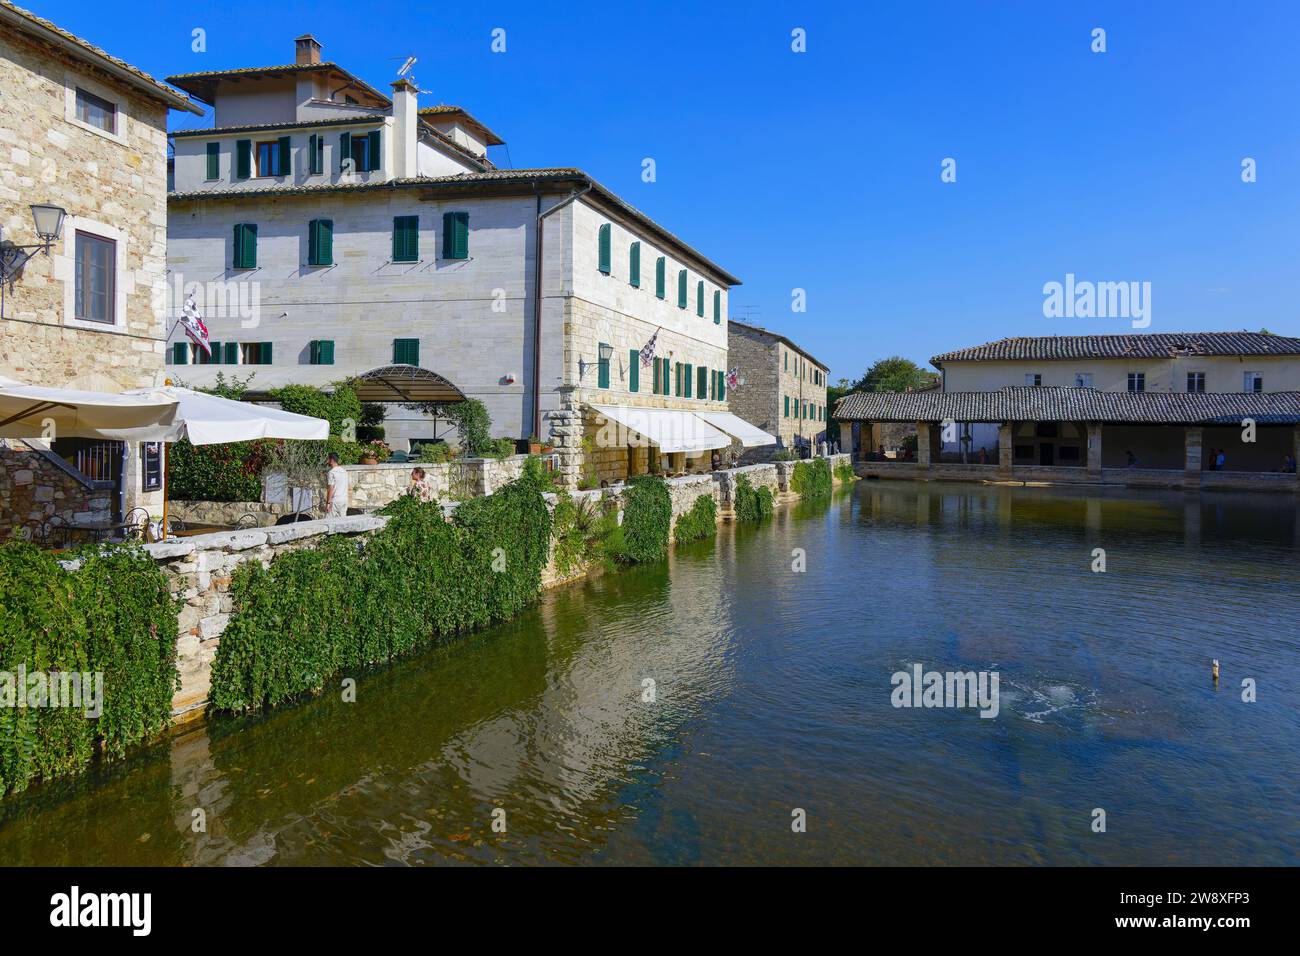 The ancient village of Bagno Vignoni, Val d'Orcia, Tuscany, Italy Stock Photo